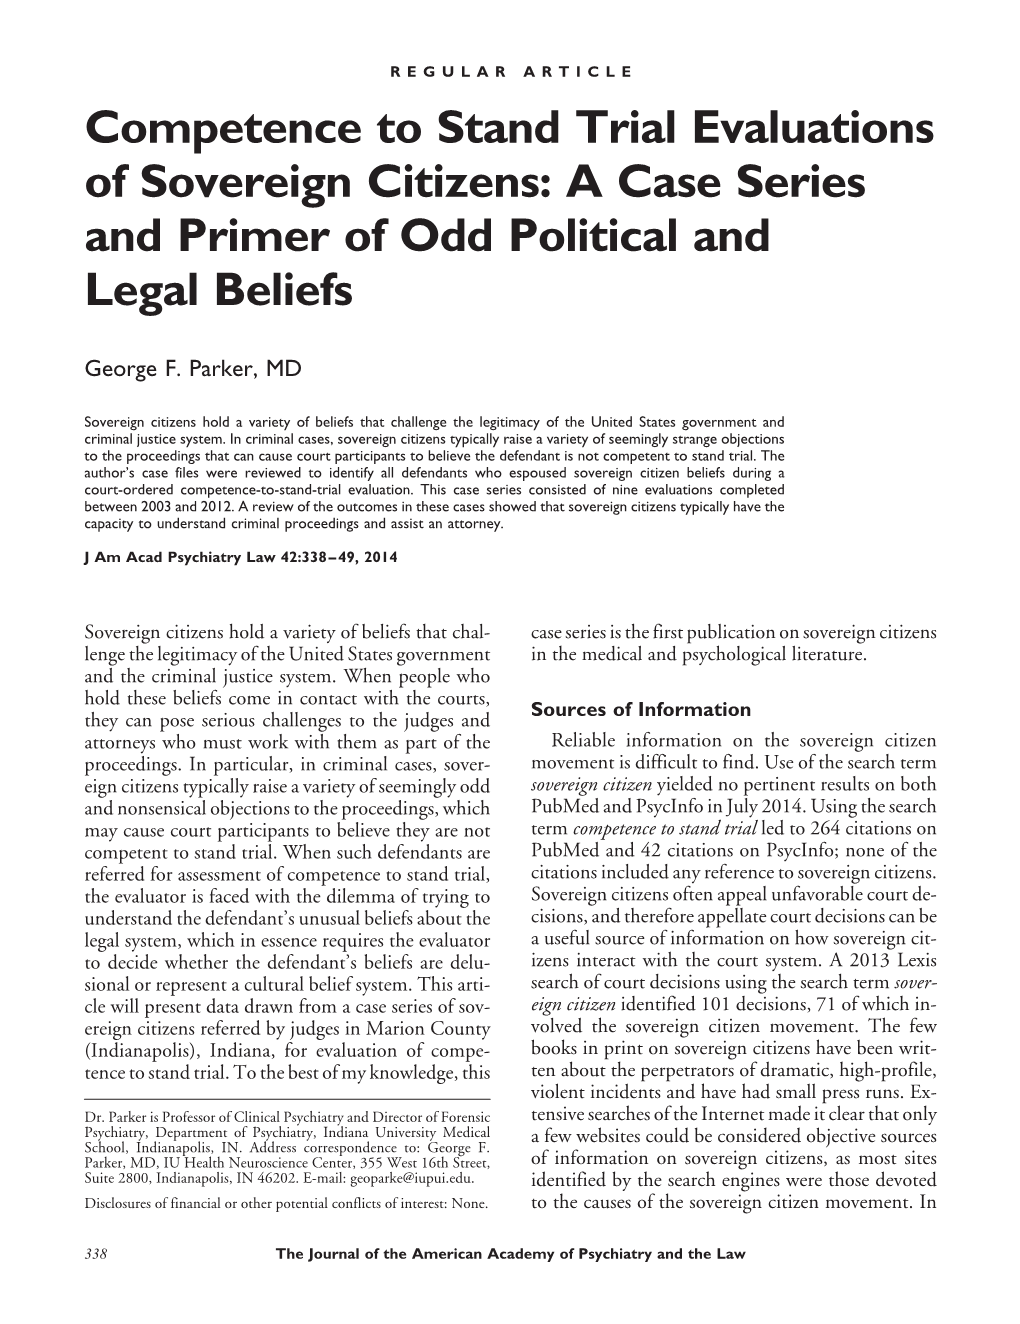 Competence to Stand Trial Evaluations of Sovereign Citizens: a Case Series and Primer of Odd Political and Legal Beliefs